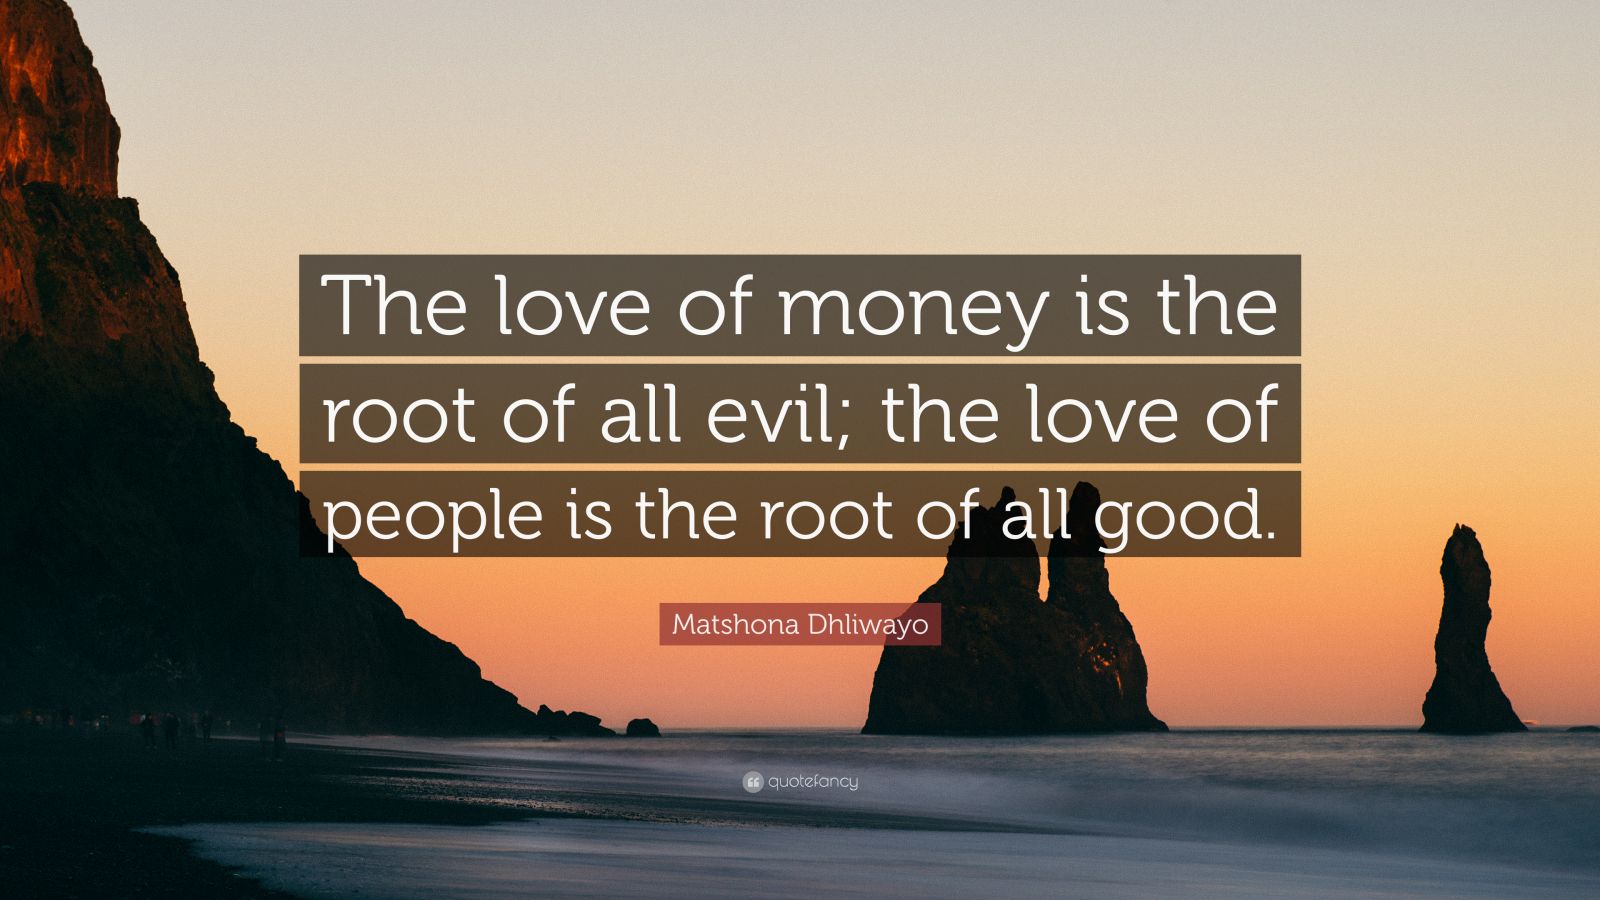 Matshona Dhliwayo Quote: “The love of money is the root of all evil ...